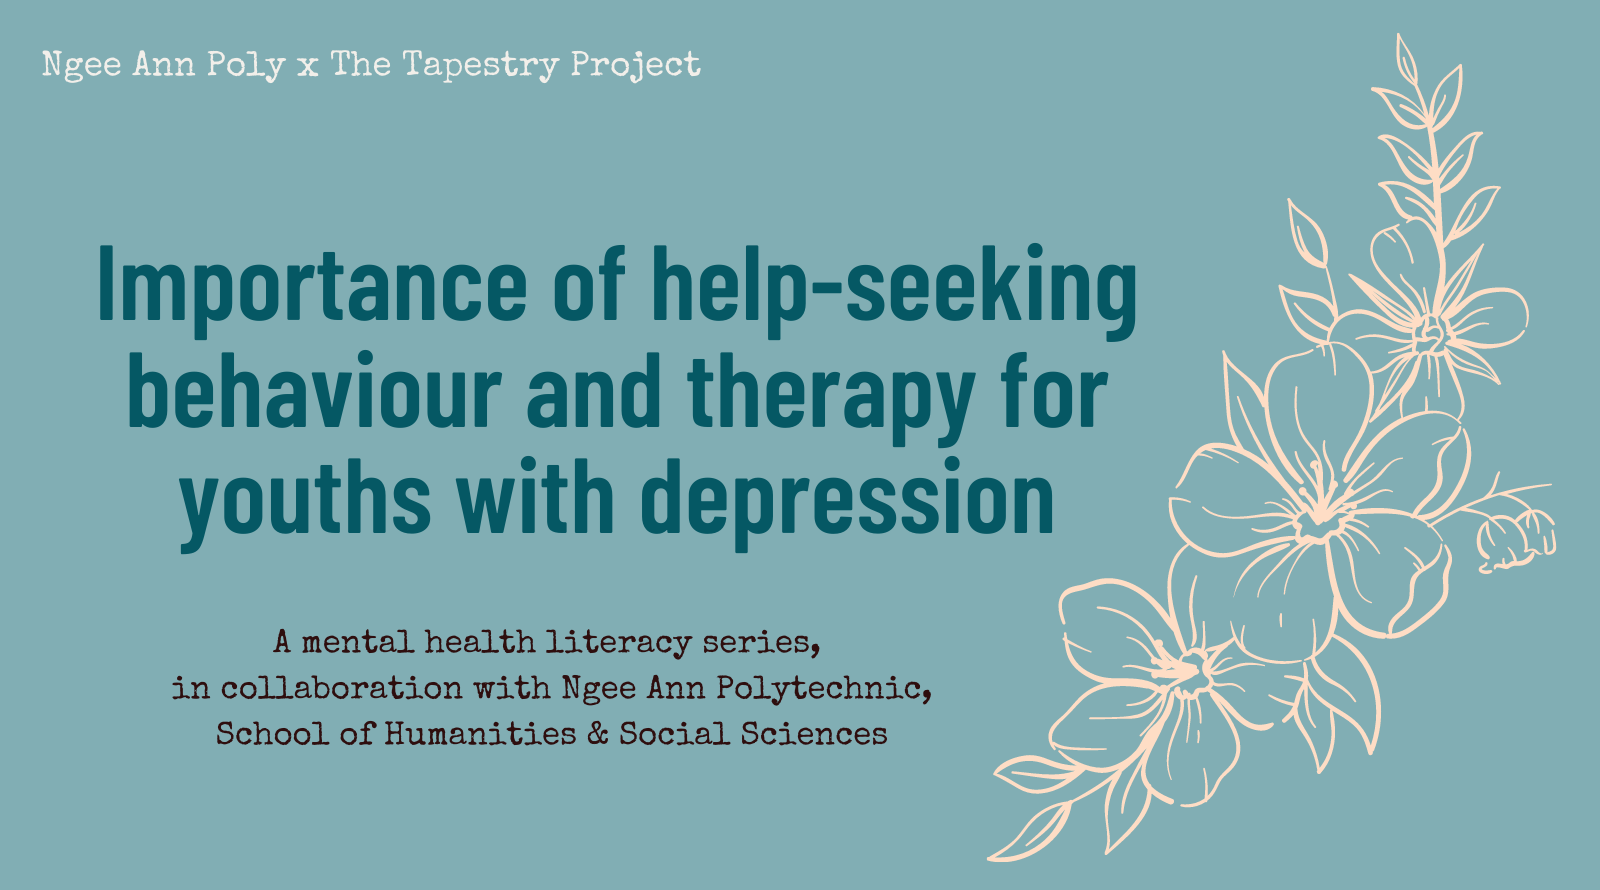 Importance of help-seeking behaviour and therapy for youths with depression